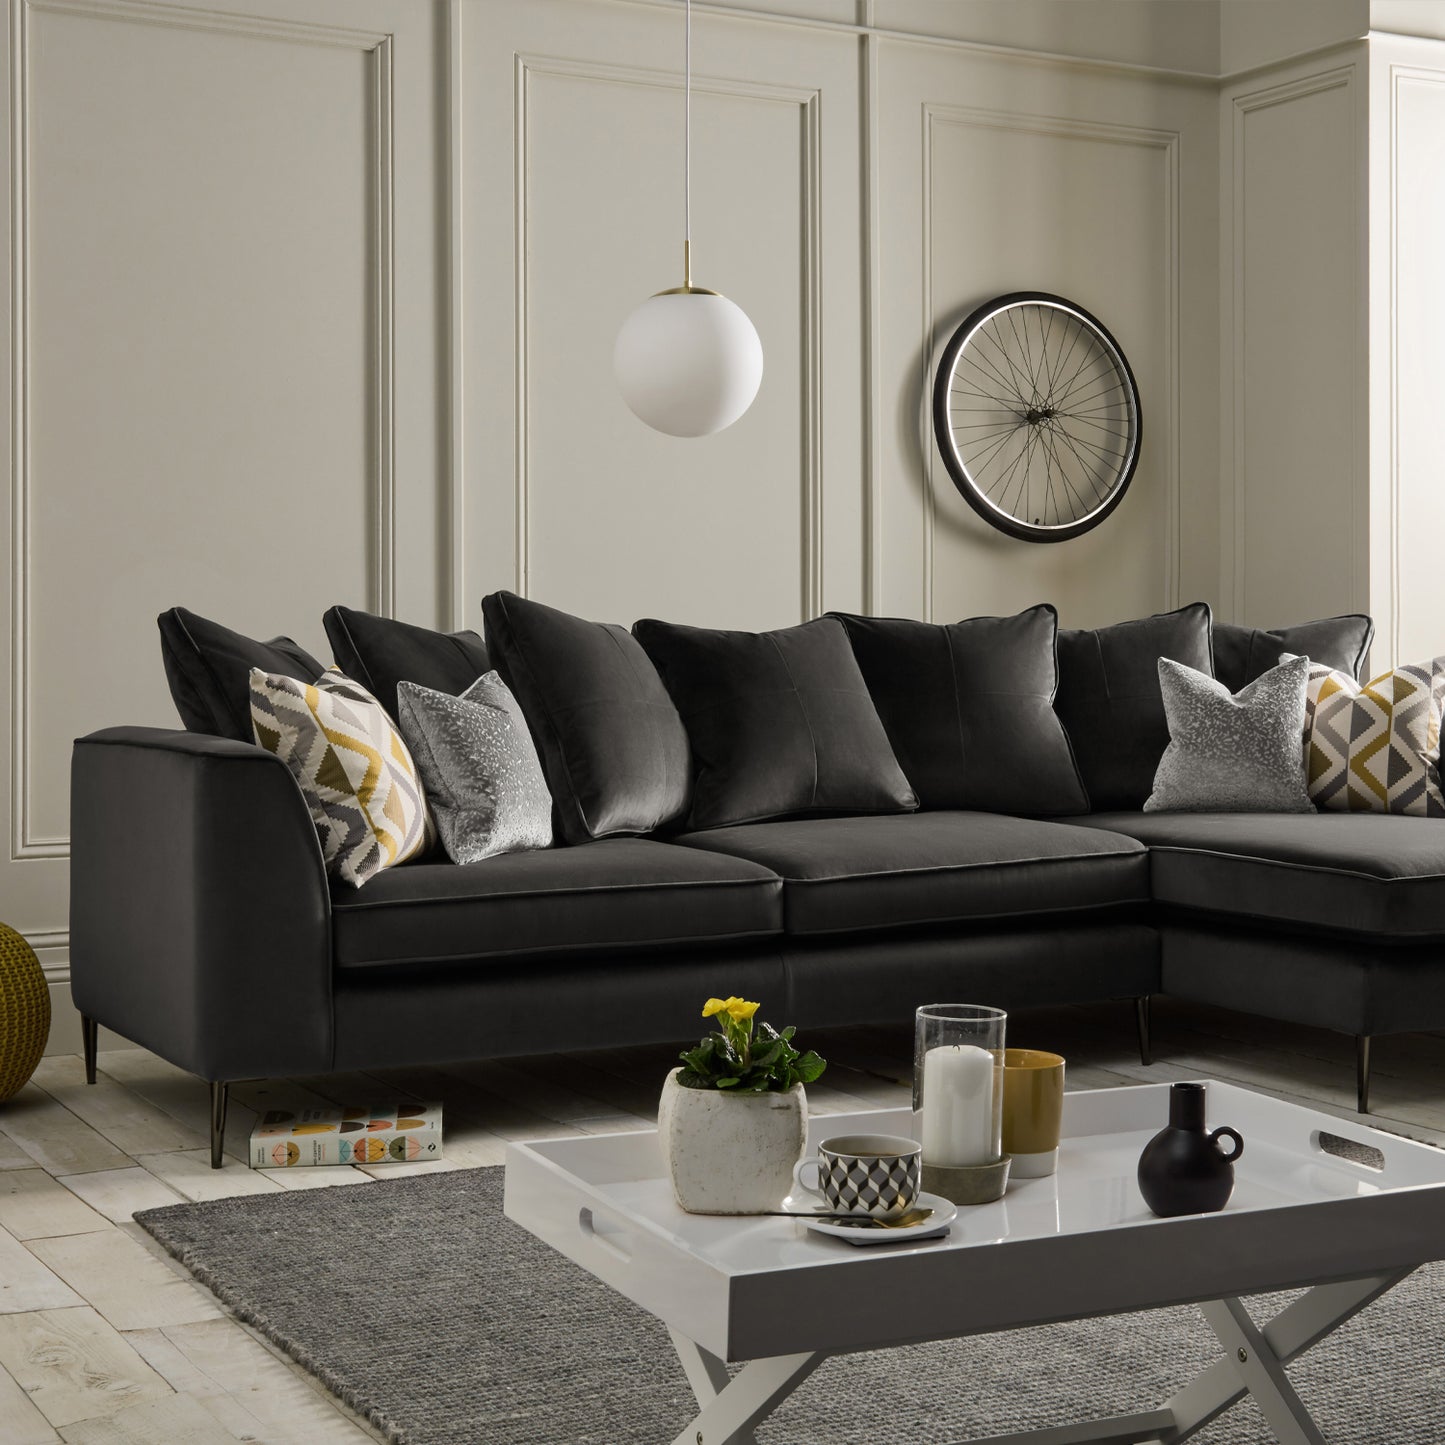 Finley Sofa - Small Scatter Back